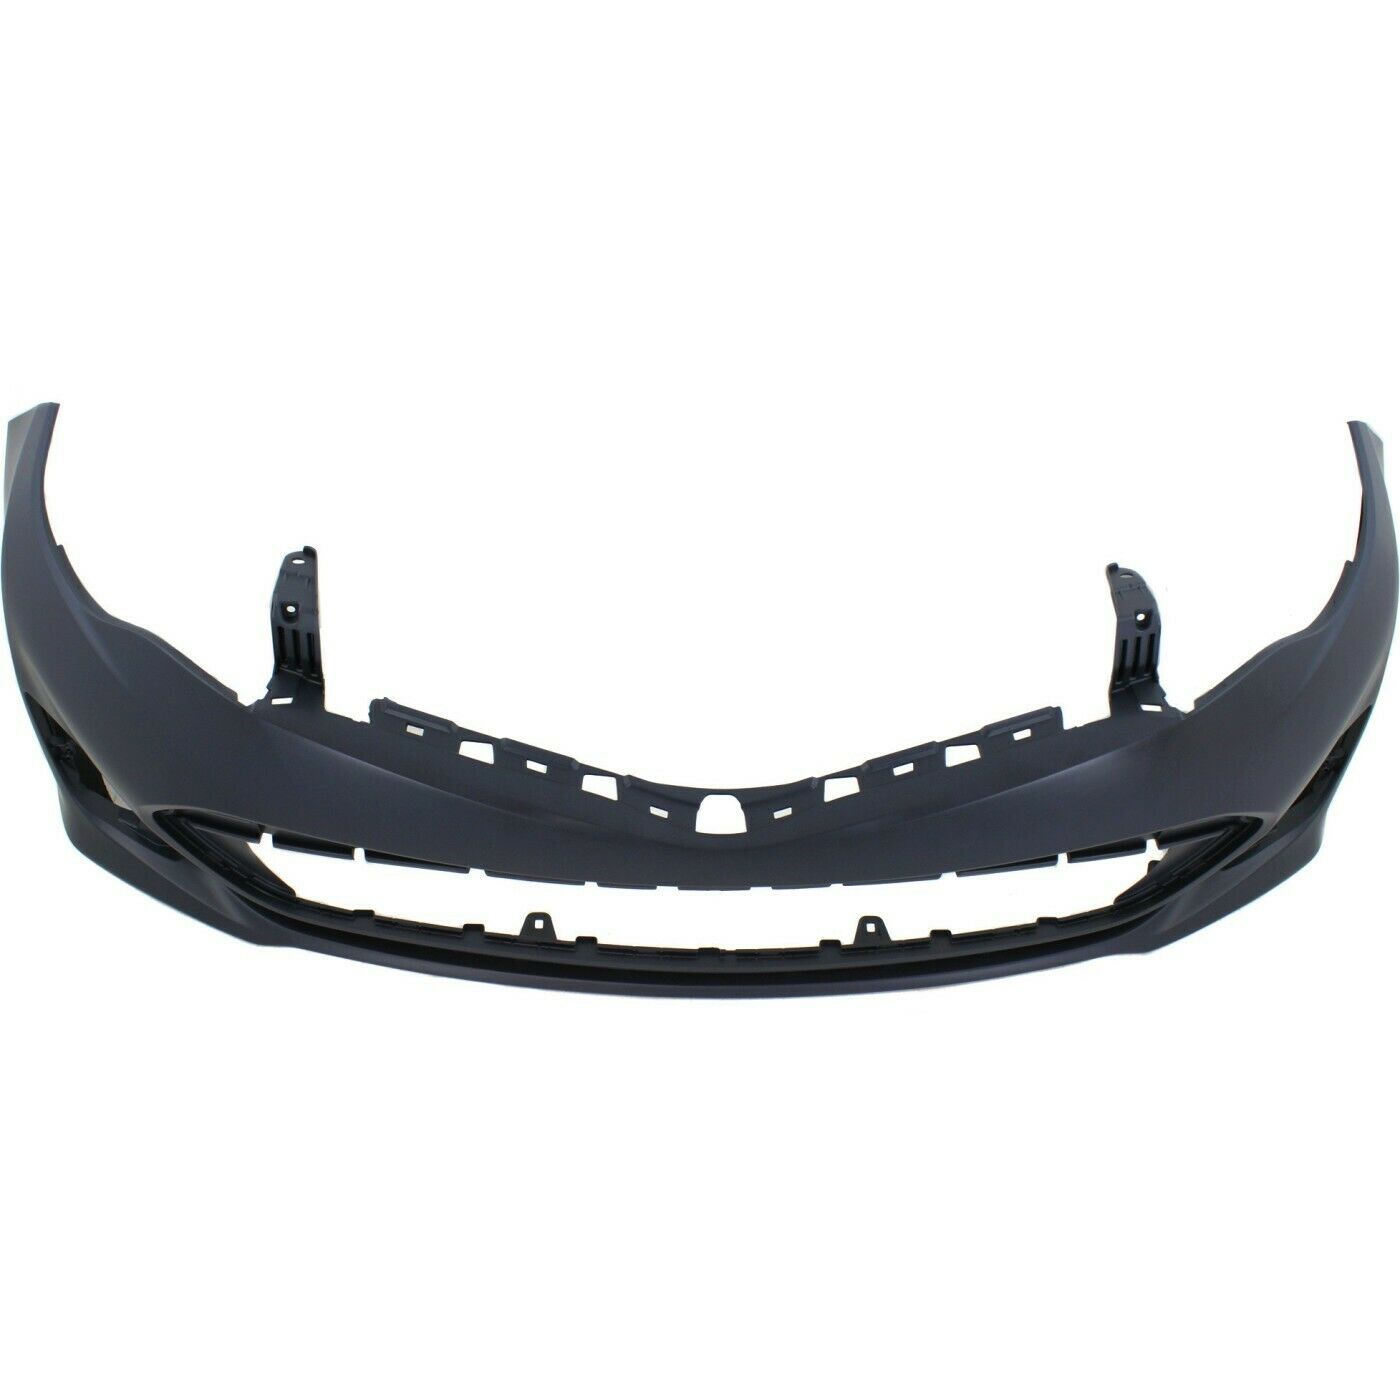 Toyota Avalon 2013 - 2015 Front Bumper Cover 13 - 15 TO1000396 Bumper-King